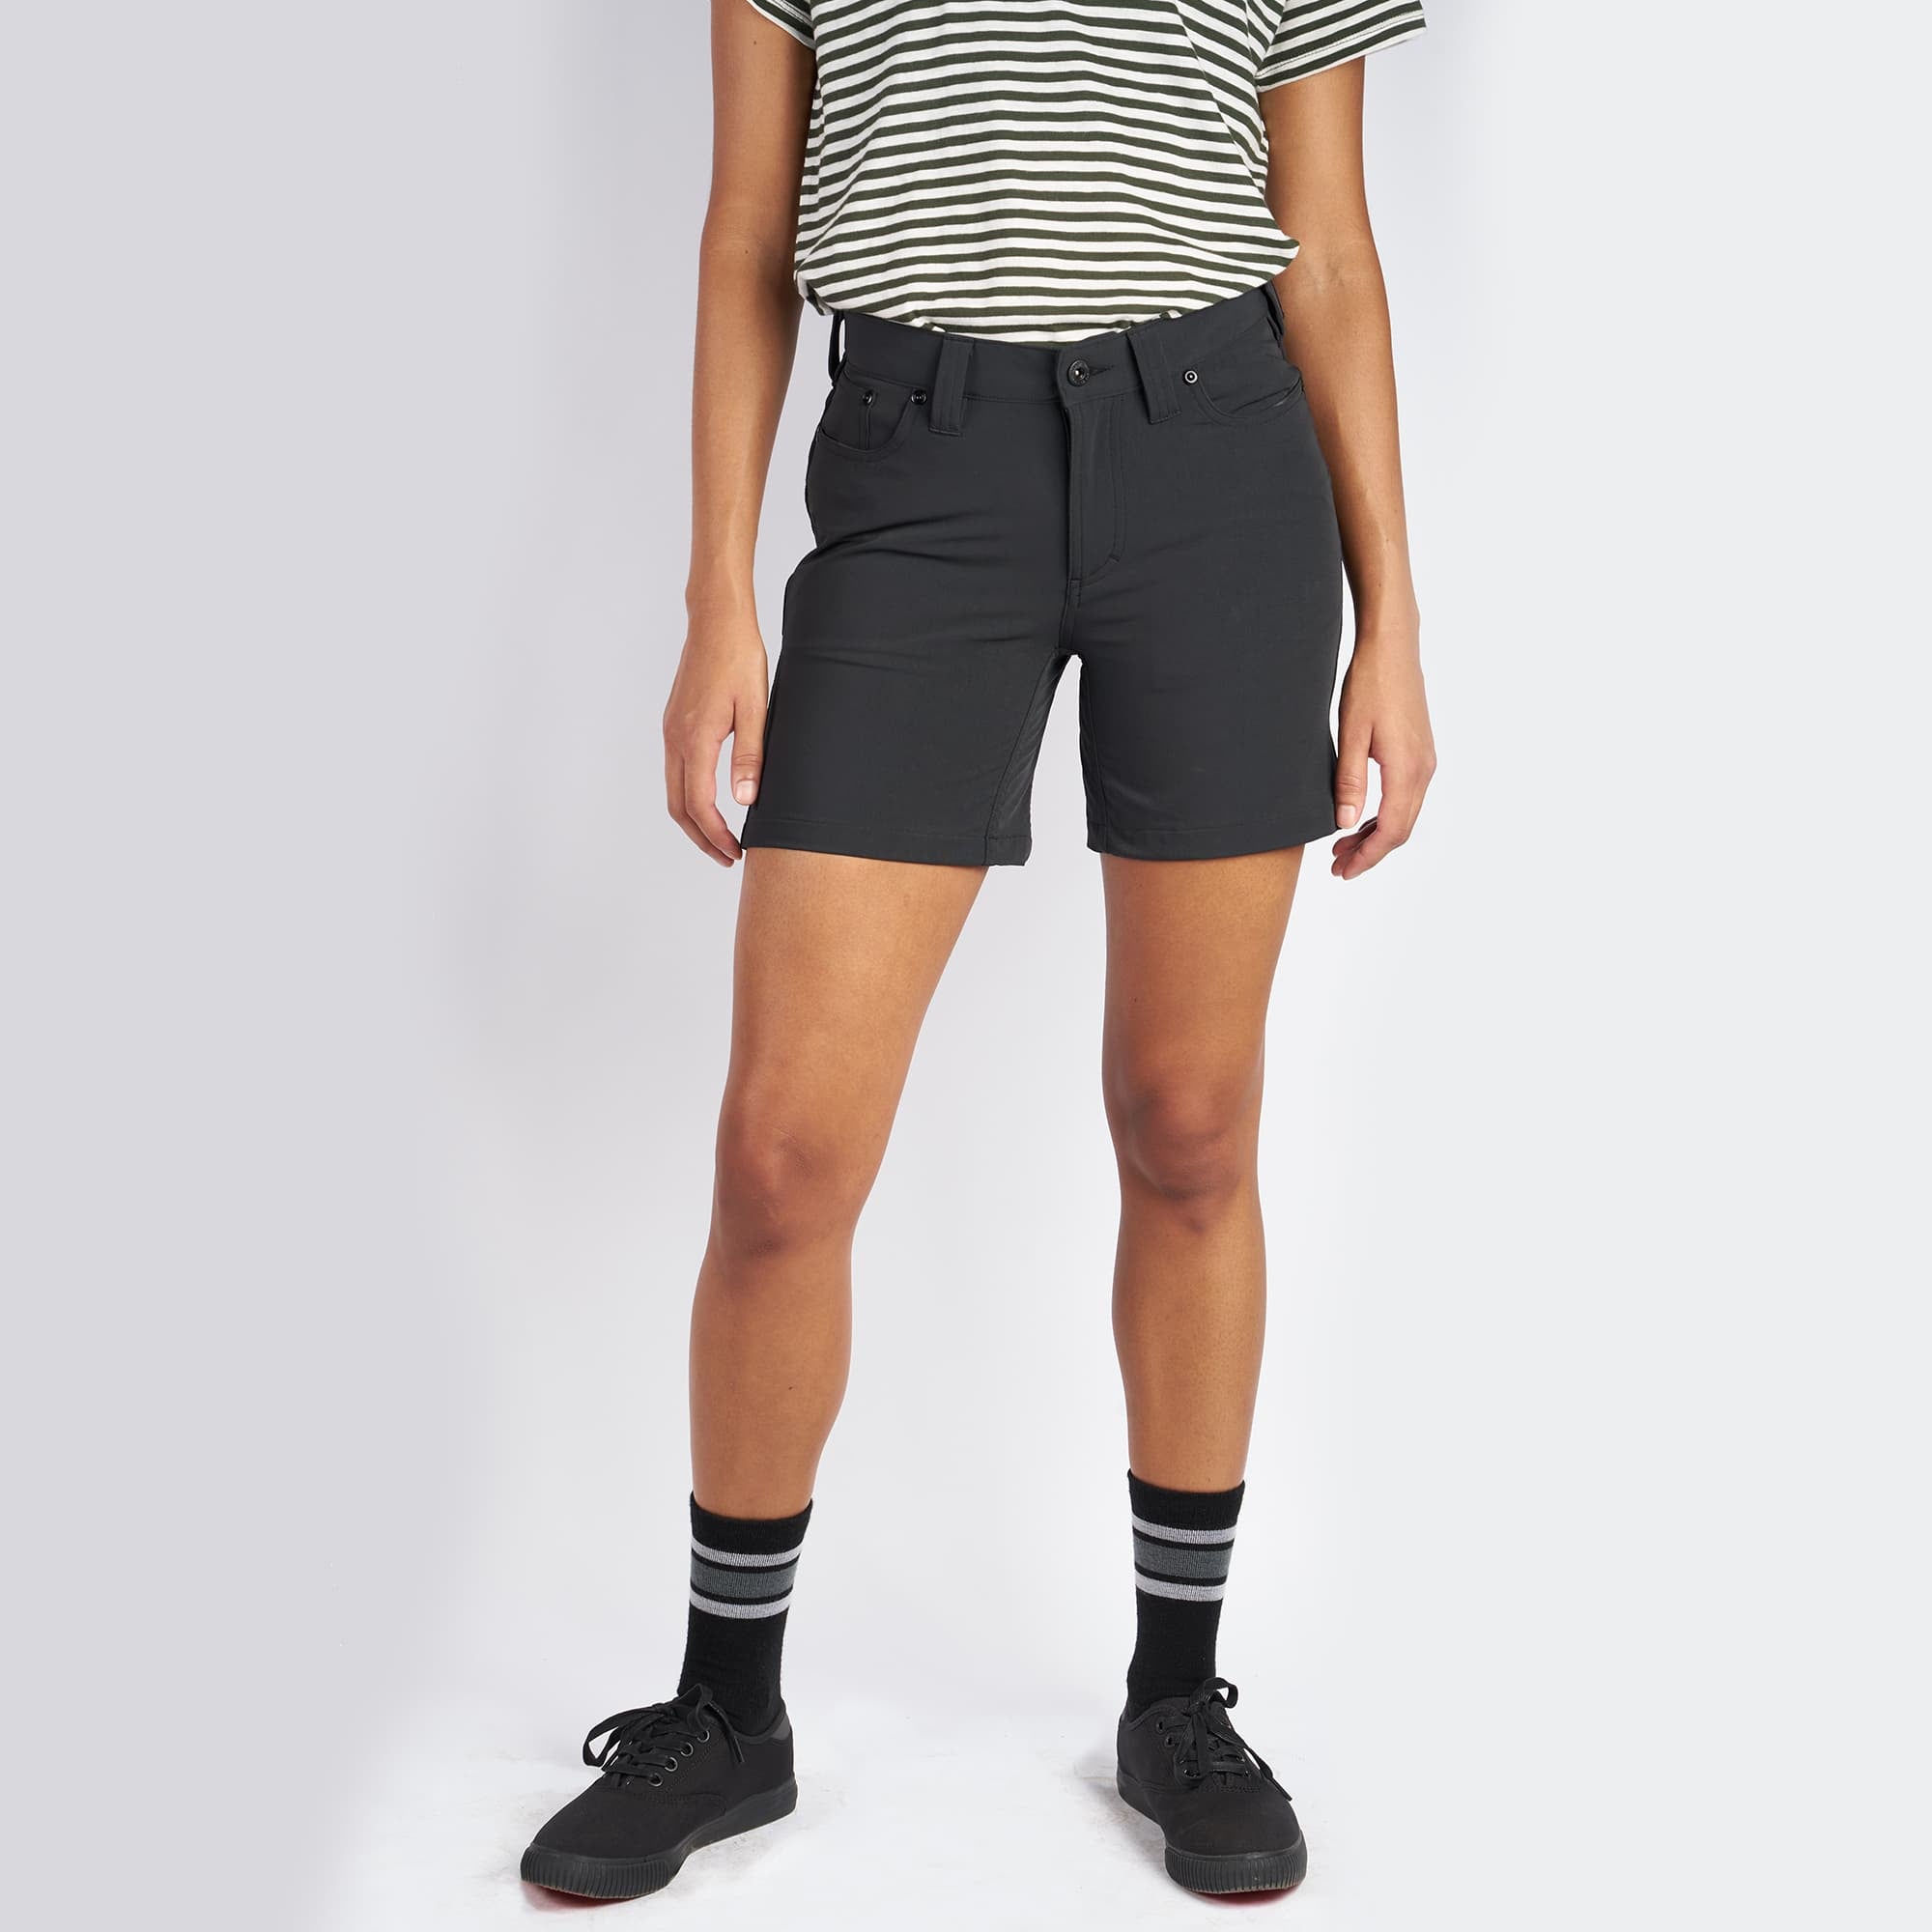 Women's Anza technical short in black worn by a woman #color_black